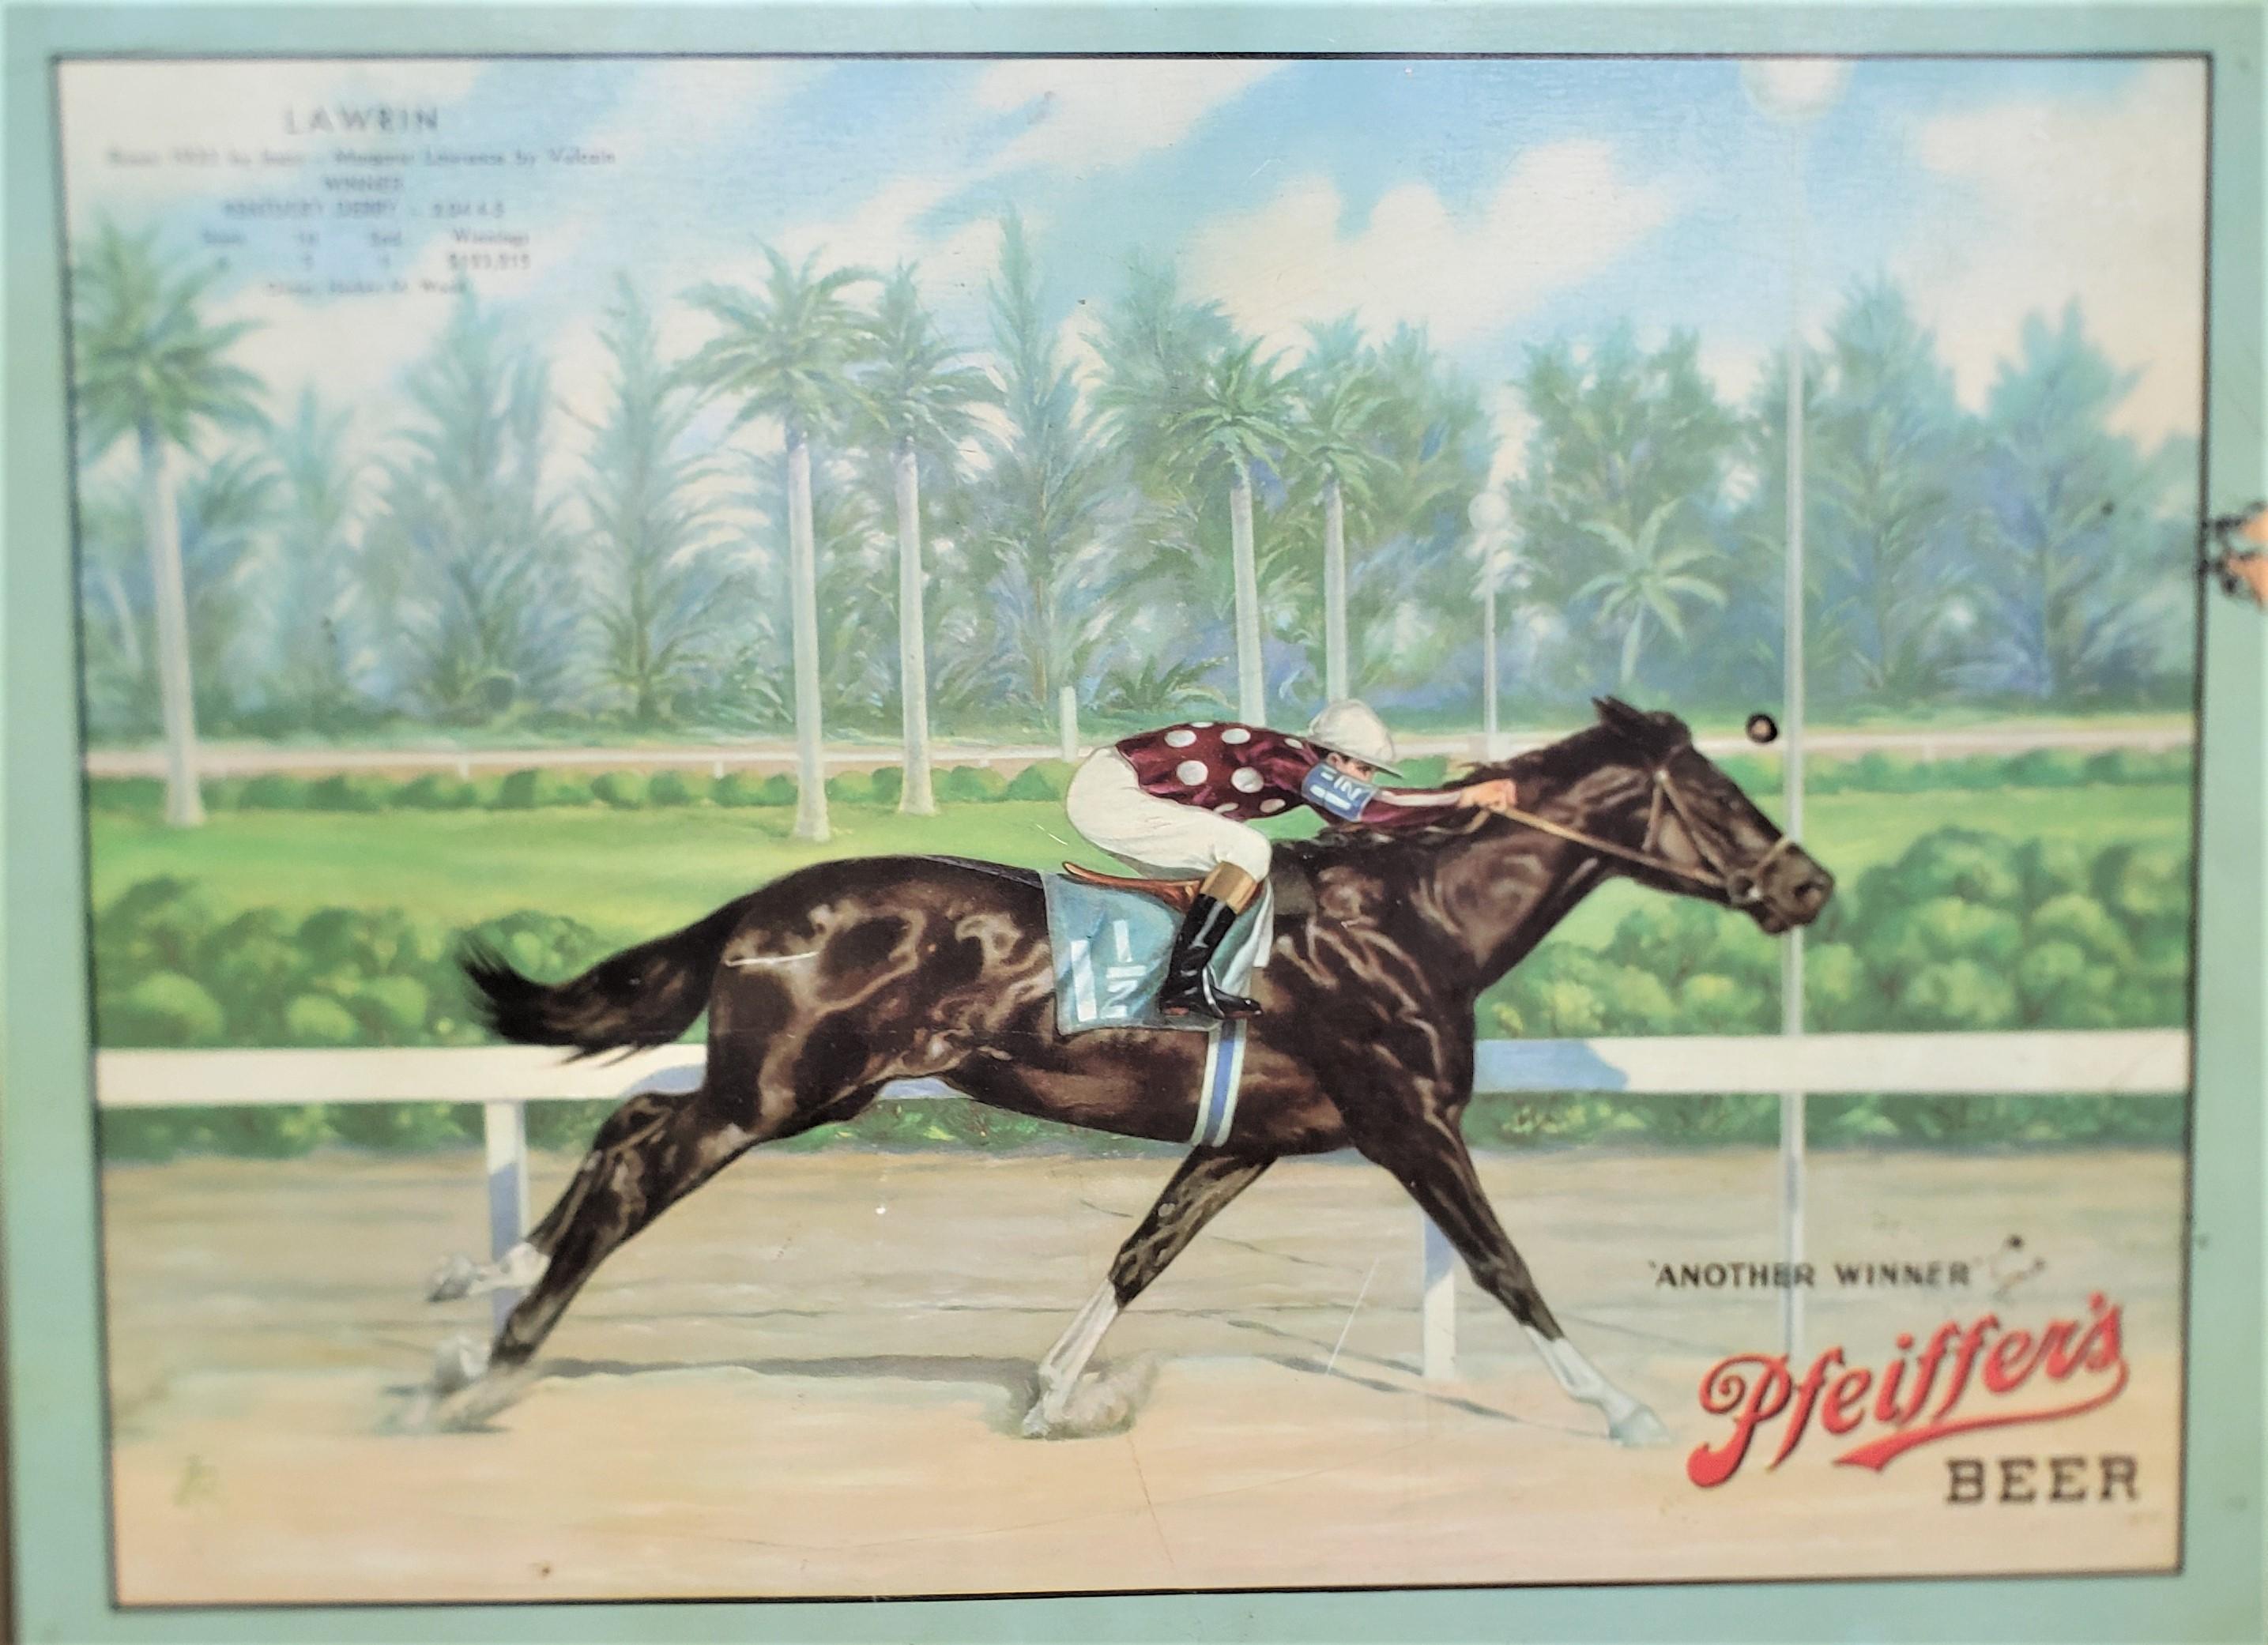 Pair of Pfeiffer's Beer Advertising Wall Hangings with a Horse Racing Theme In Good Condition For Sale In Hamilton, Ontario